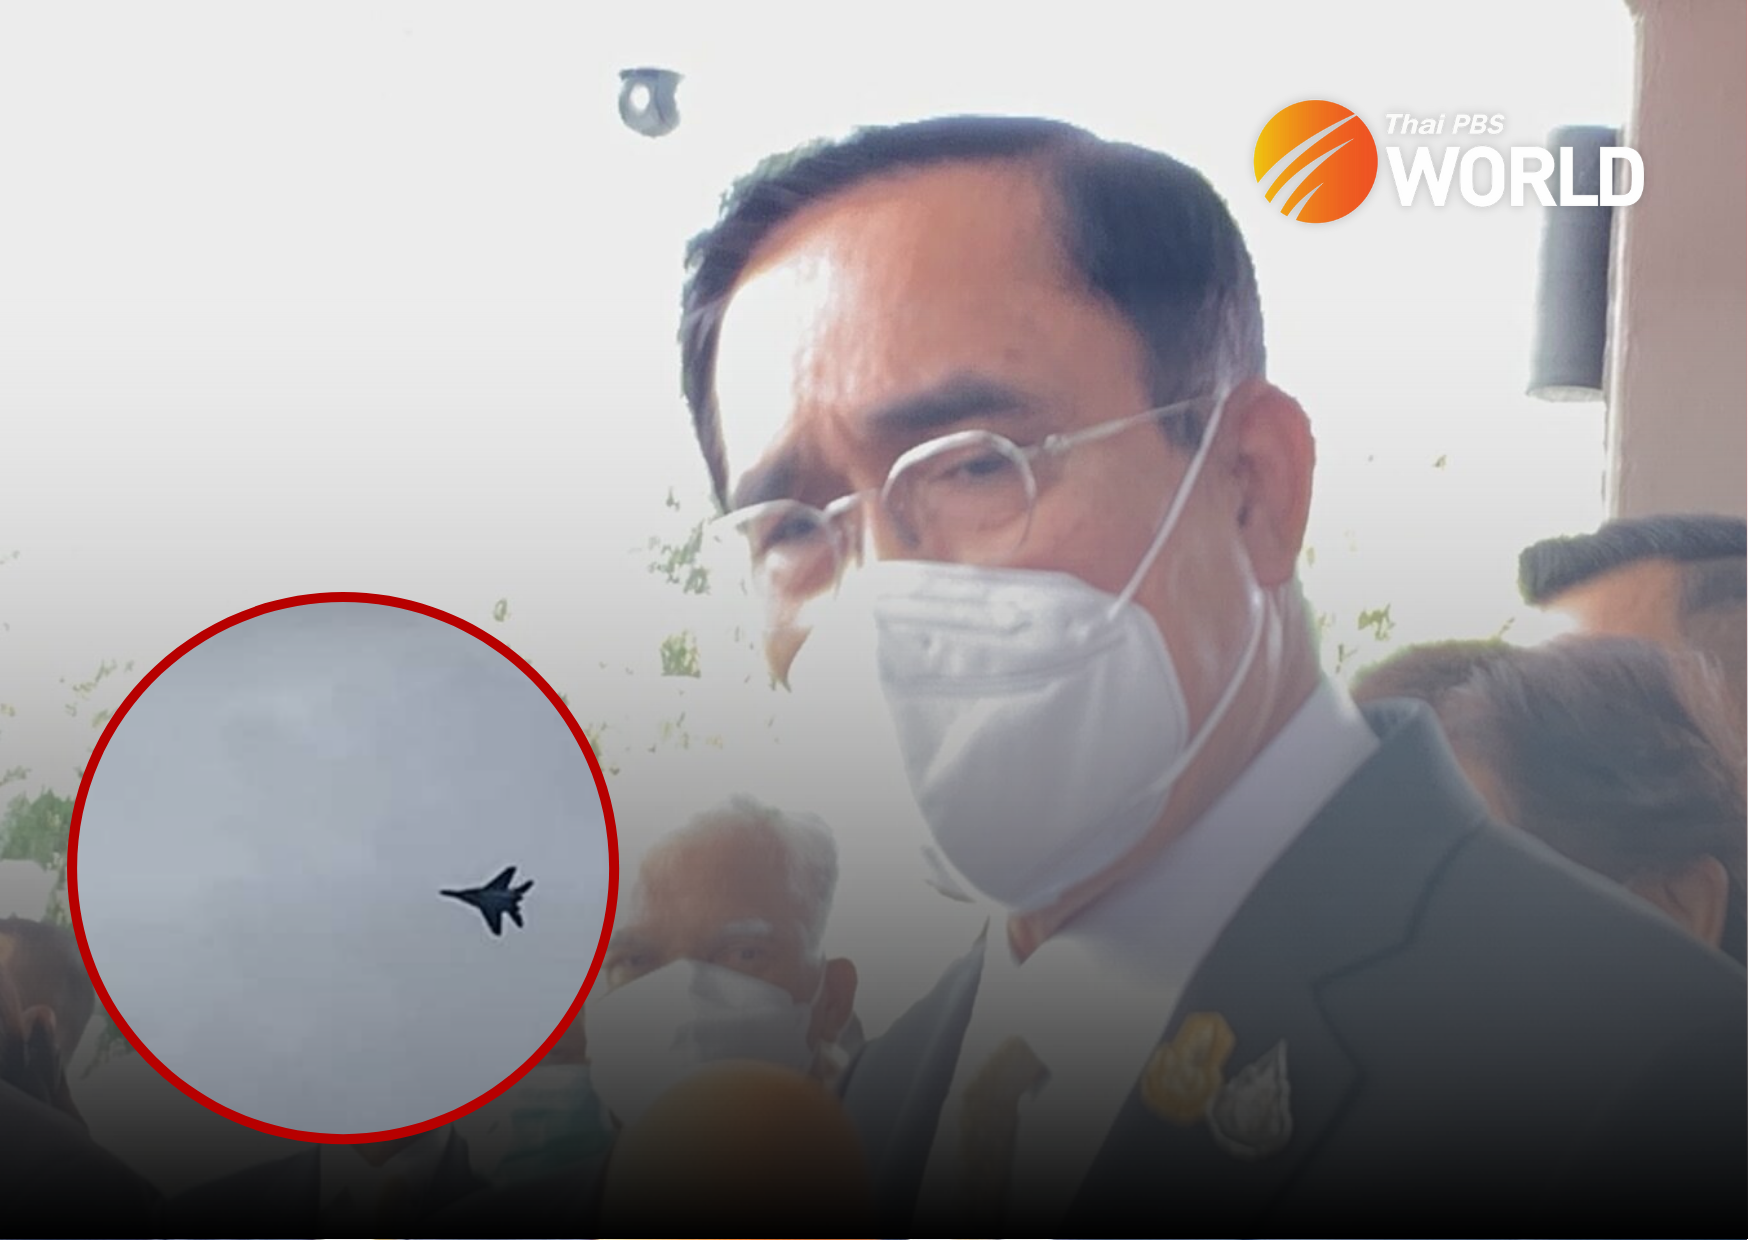 PM says incursion of Myanmar jet into Thai airspace not a big deal | Thai PBS World : The latest Thai news in English, News Headlines, World News and News Broadcasts in